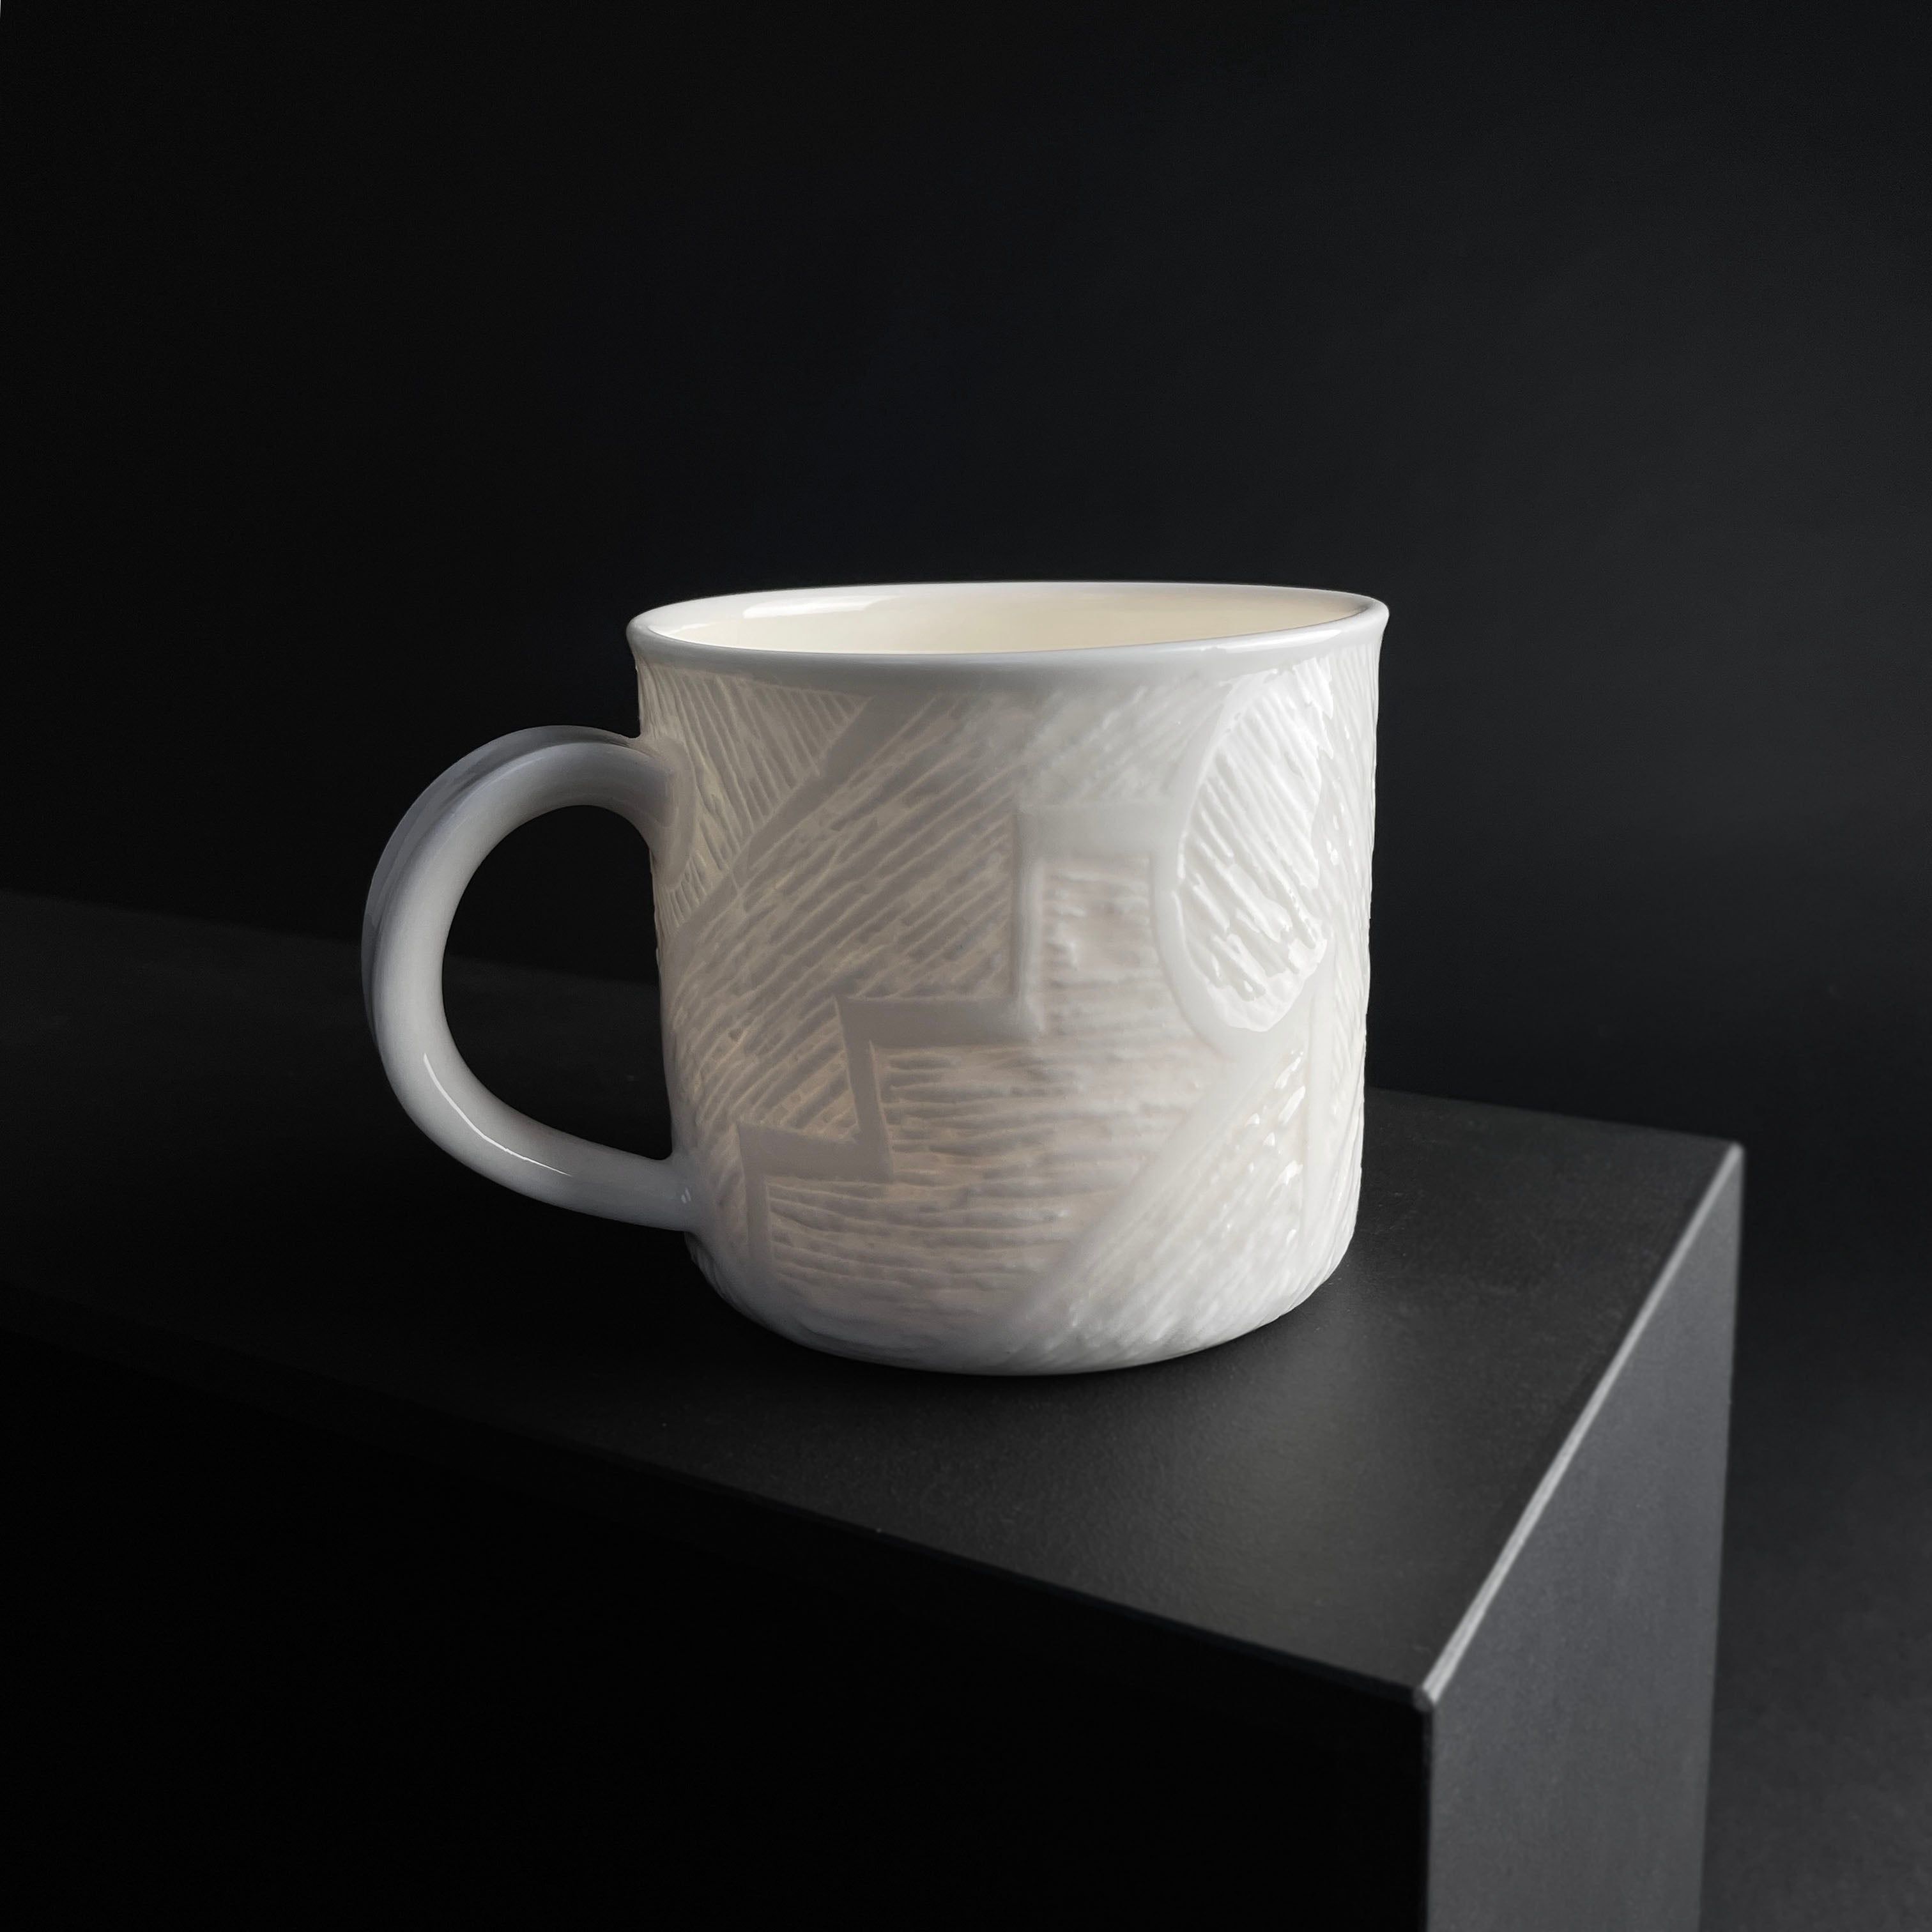 WHITE PORCELAIN CUP